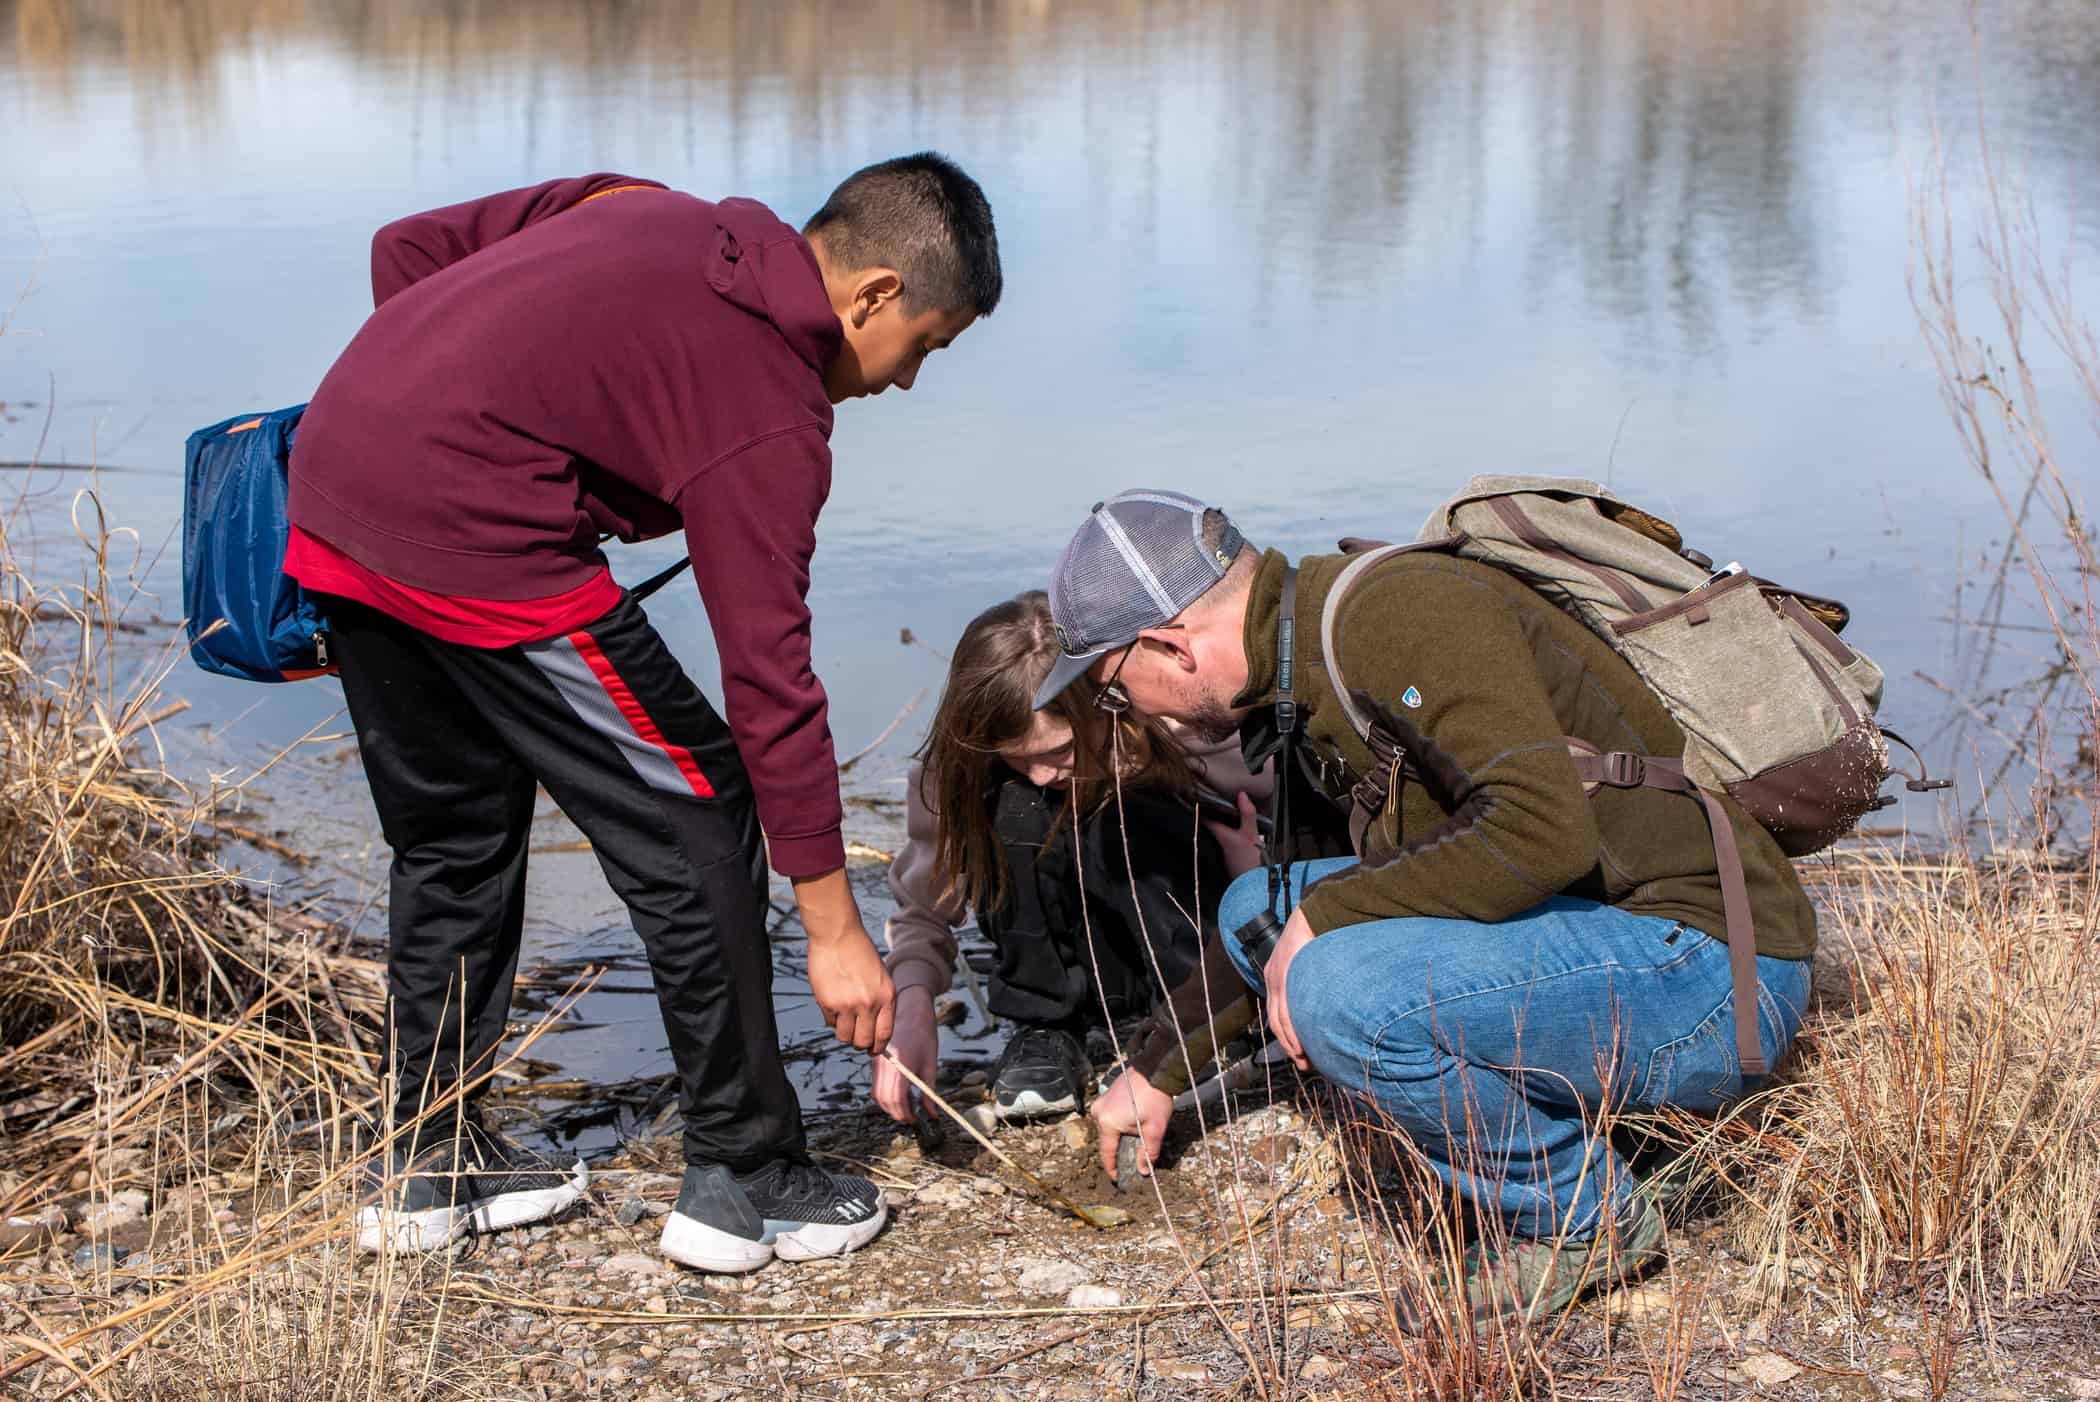 Male middle school student is bending over while pushing a stick into the ground next to a stream. A female middle school student and male teacher are squatting down examining something in the dirt to the right of the male student.